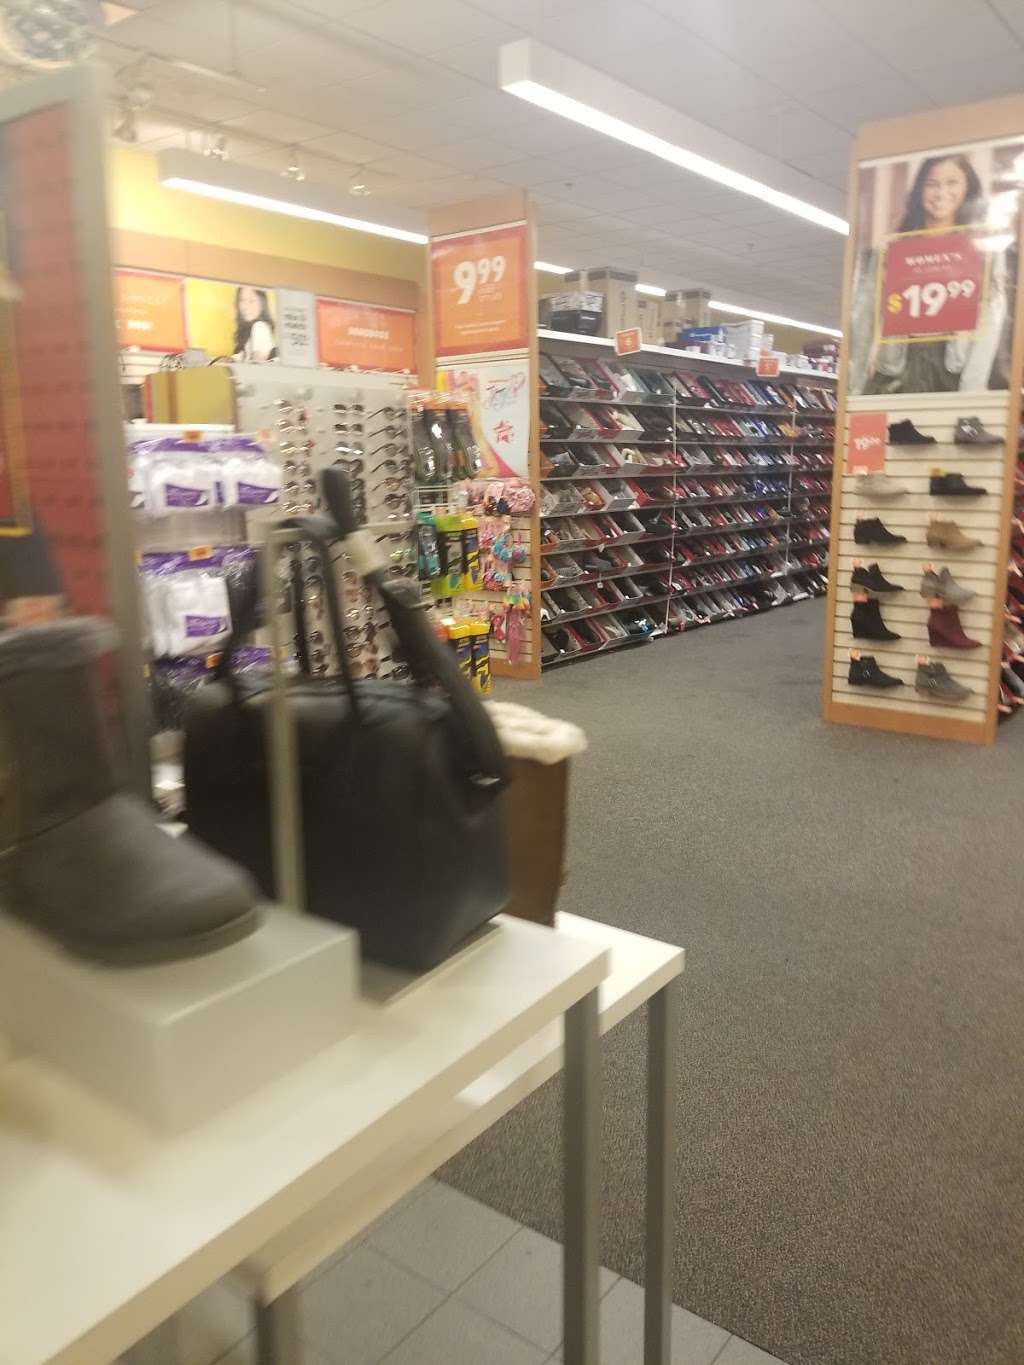 Payless ShoeSource | 257 Lehigh Valley Mall, Whitehall, PA 18052, USA | Phone: (610) 264-2201